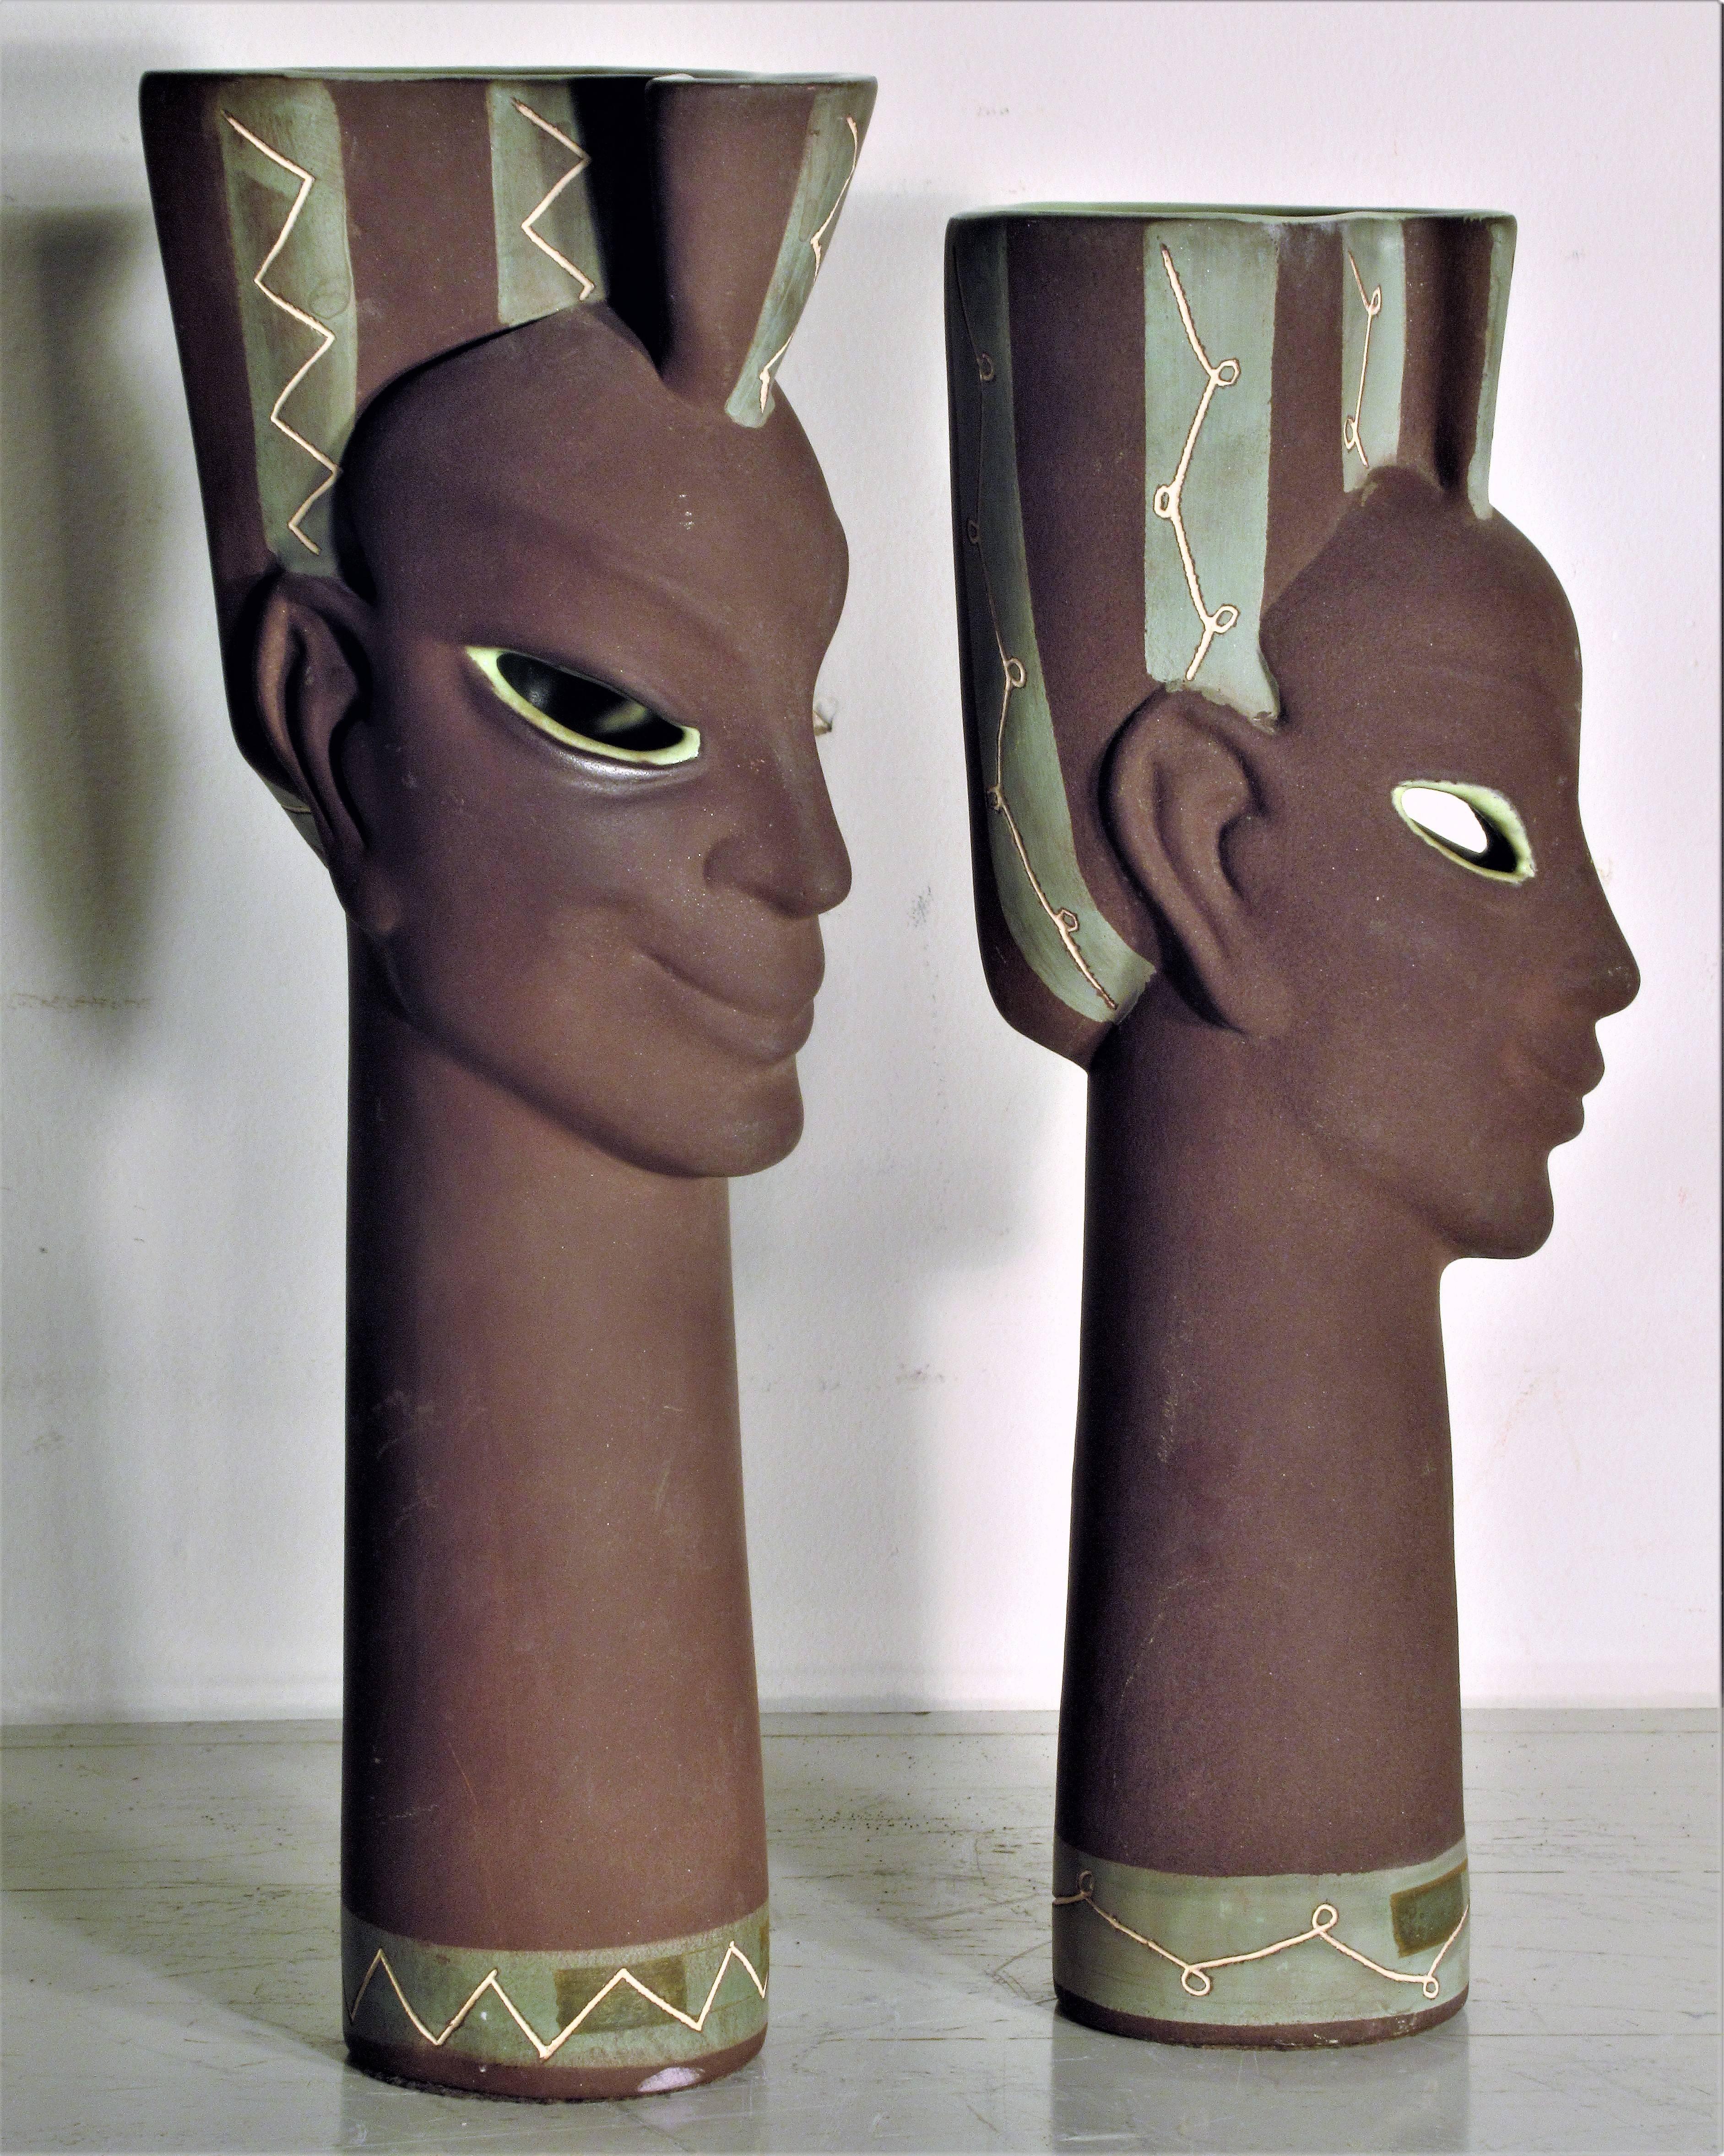 Two ceramic high style exotic male and female head sculpture vases with incised detailing and polychrome glazing. Larger figure measures 15 inches high x 5 1/2 inches wide x 5 inches deep - smaller figure measures 14 inches high x 4 1/2 inches wide